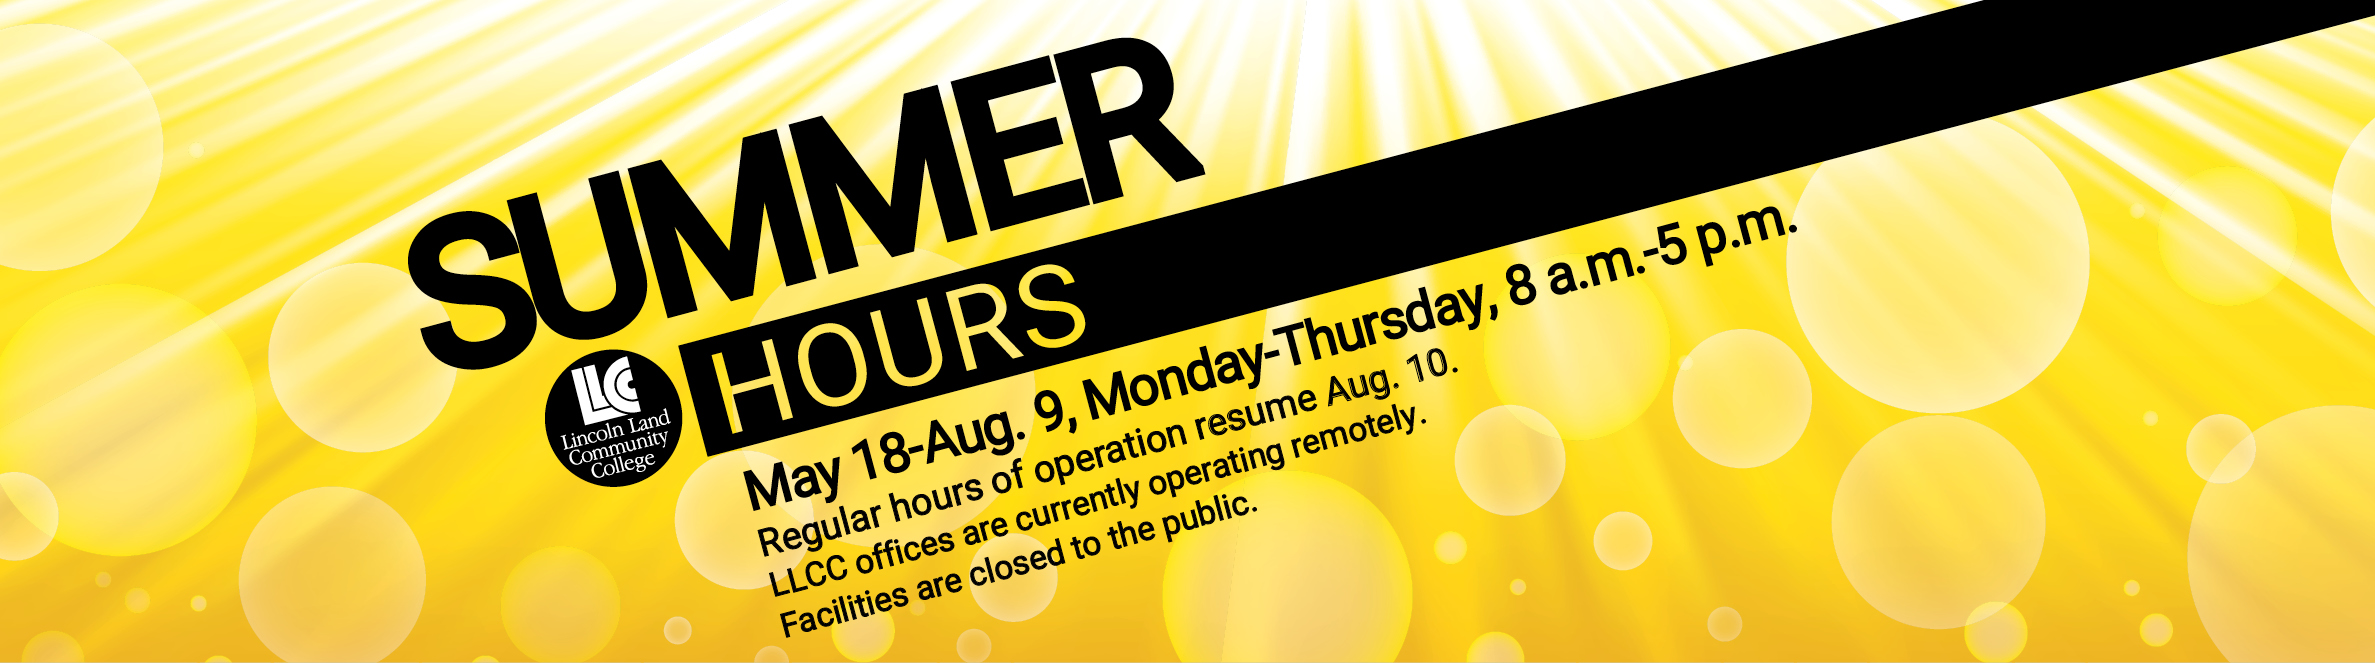 LLCC Lincoln Land Community College Summer Hours: May 18-Aug. 9, Monday-Thursday, 8 a.m.-5 p.m. Regular hours of operation resume Aug. 10. LLCC offices are currently operating remotely. Facilities are closed to the public.